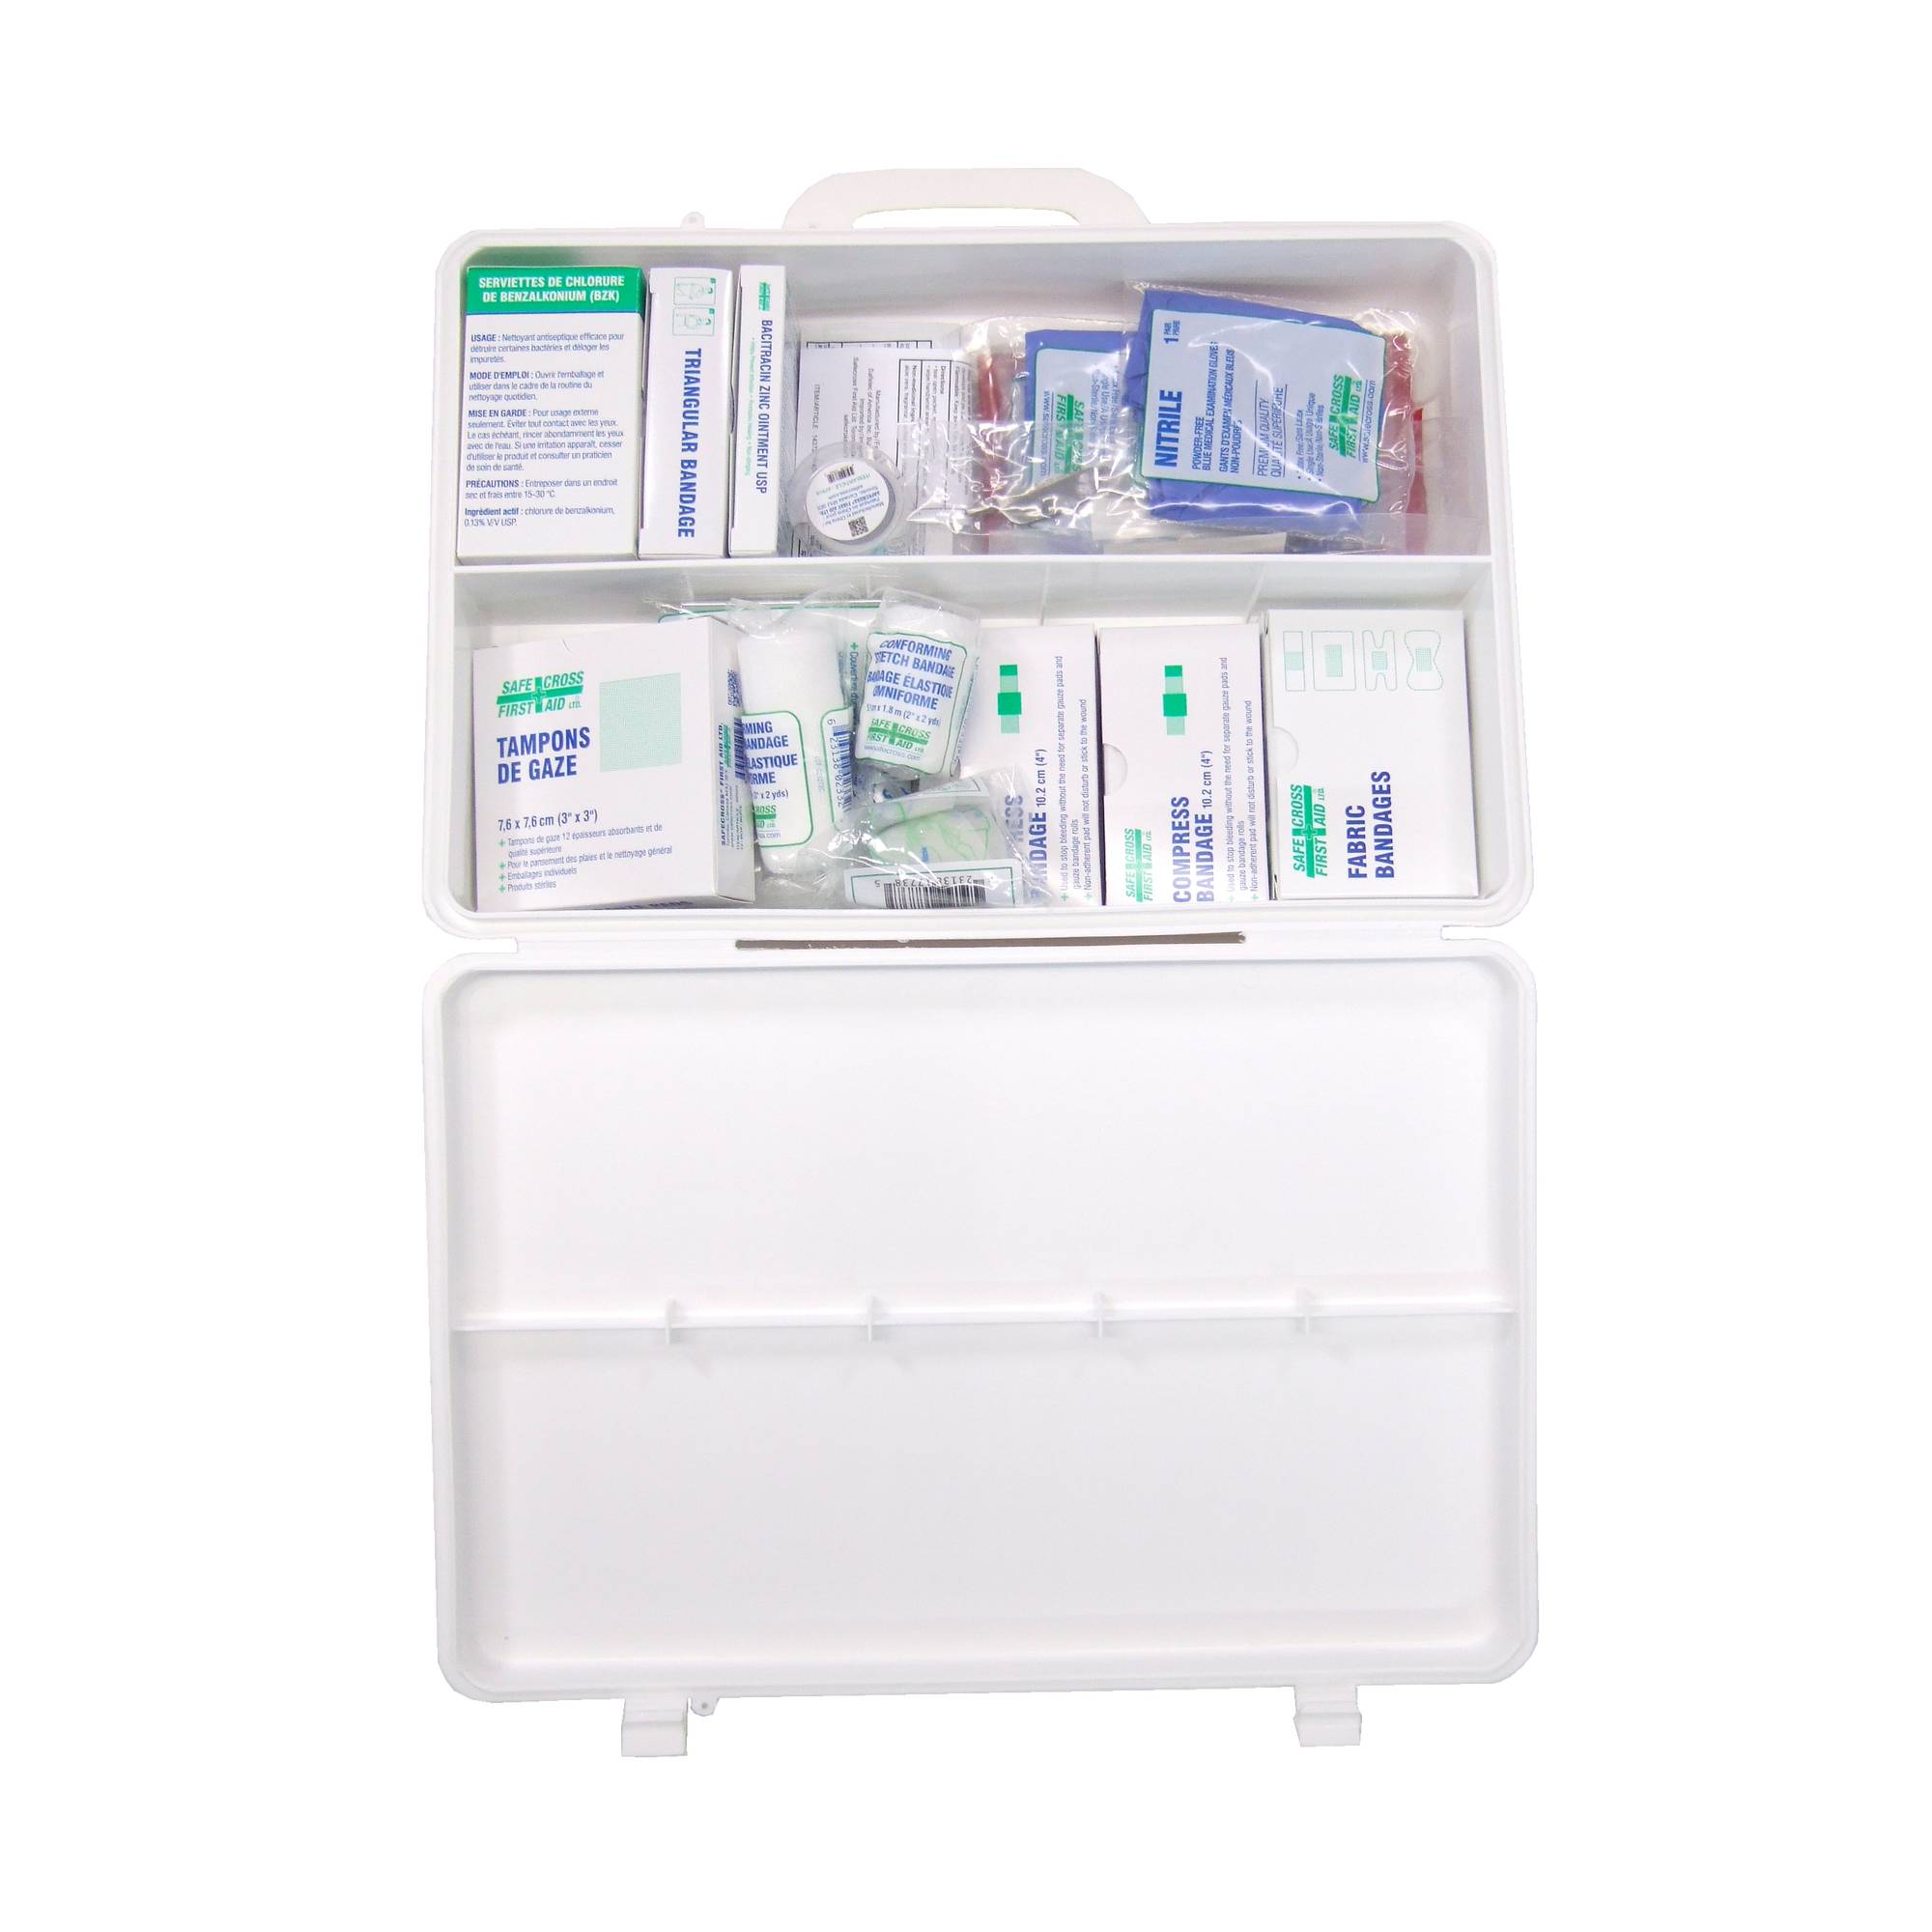 https://media.sylprotec.com/22539/first-aid-kit-conforming-to-cancsa-z1220-17-low-risk-for-25-workers-and-less.jpg